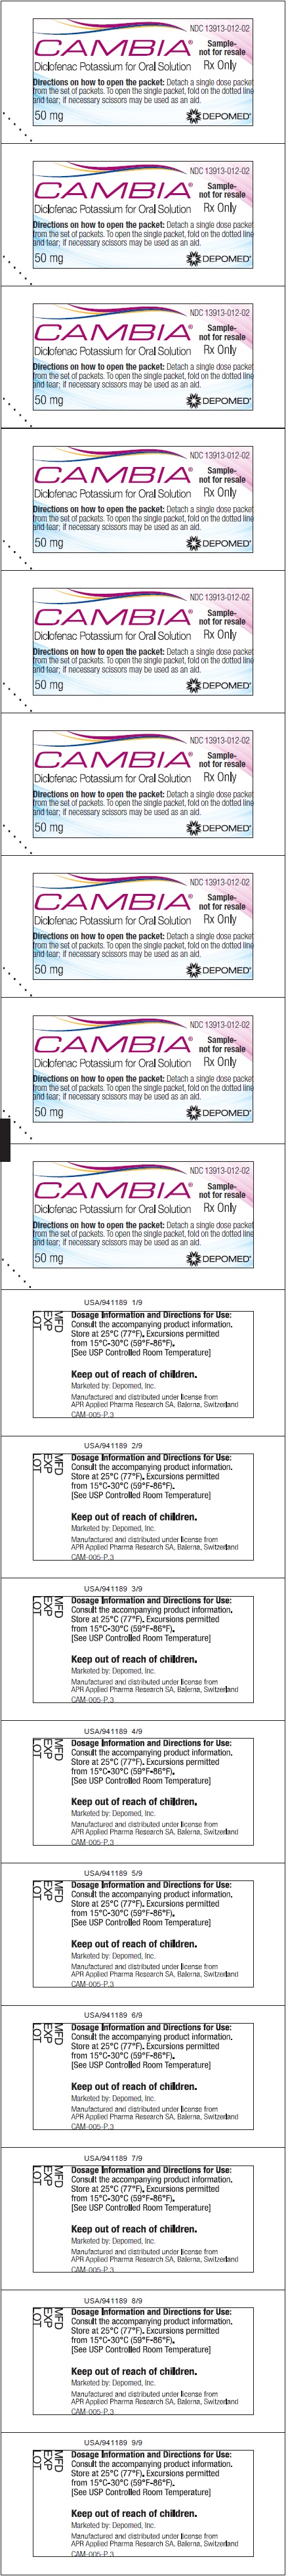 Cambia 50 mg rx only sachet (Sample - Not for Resale)